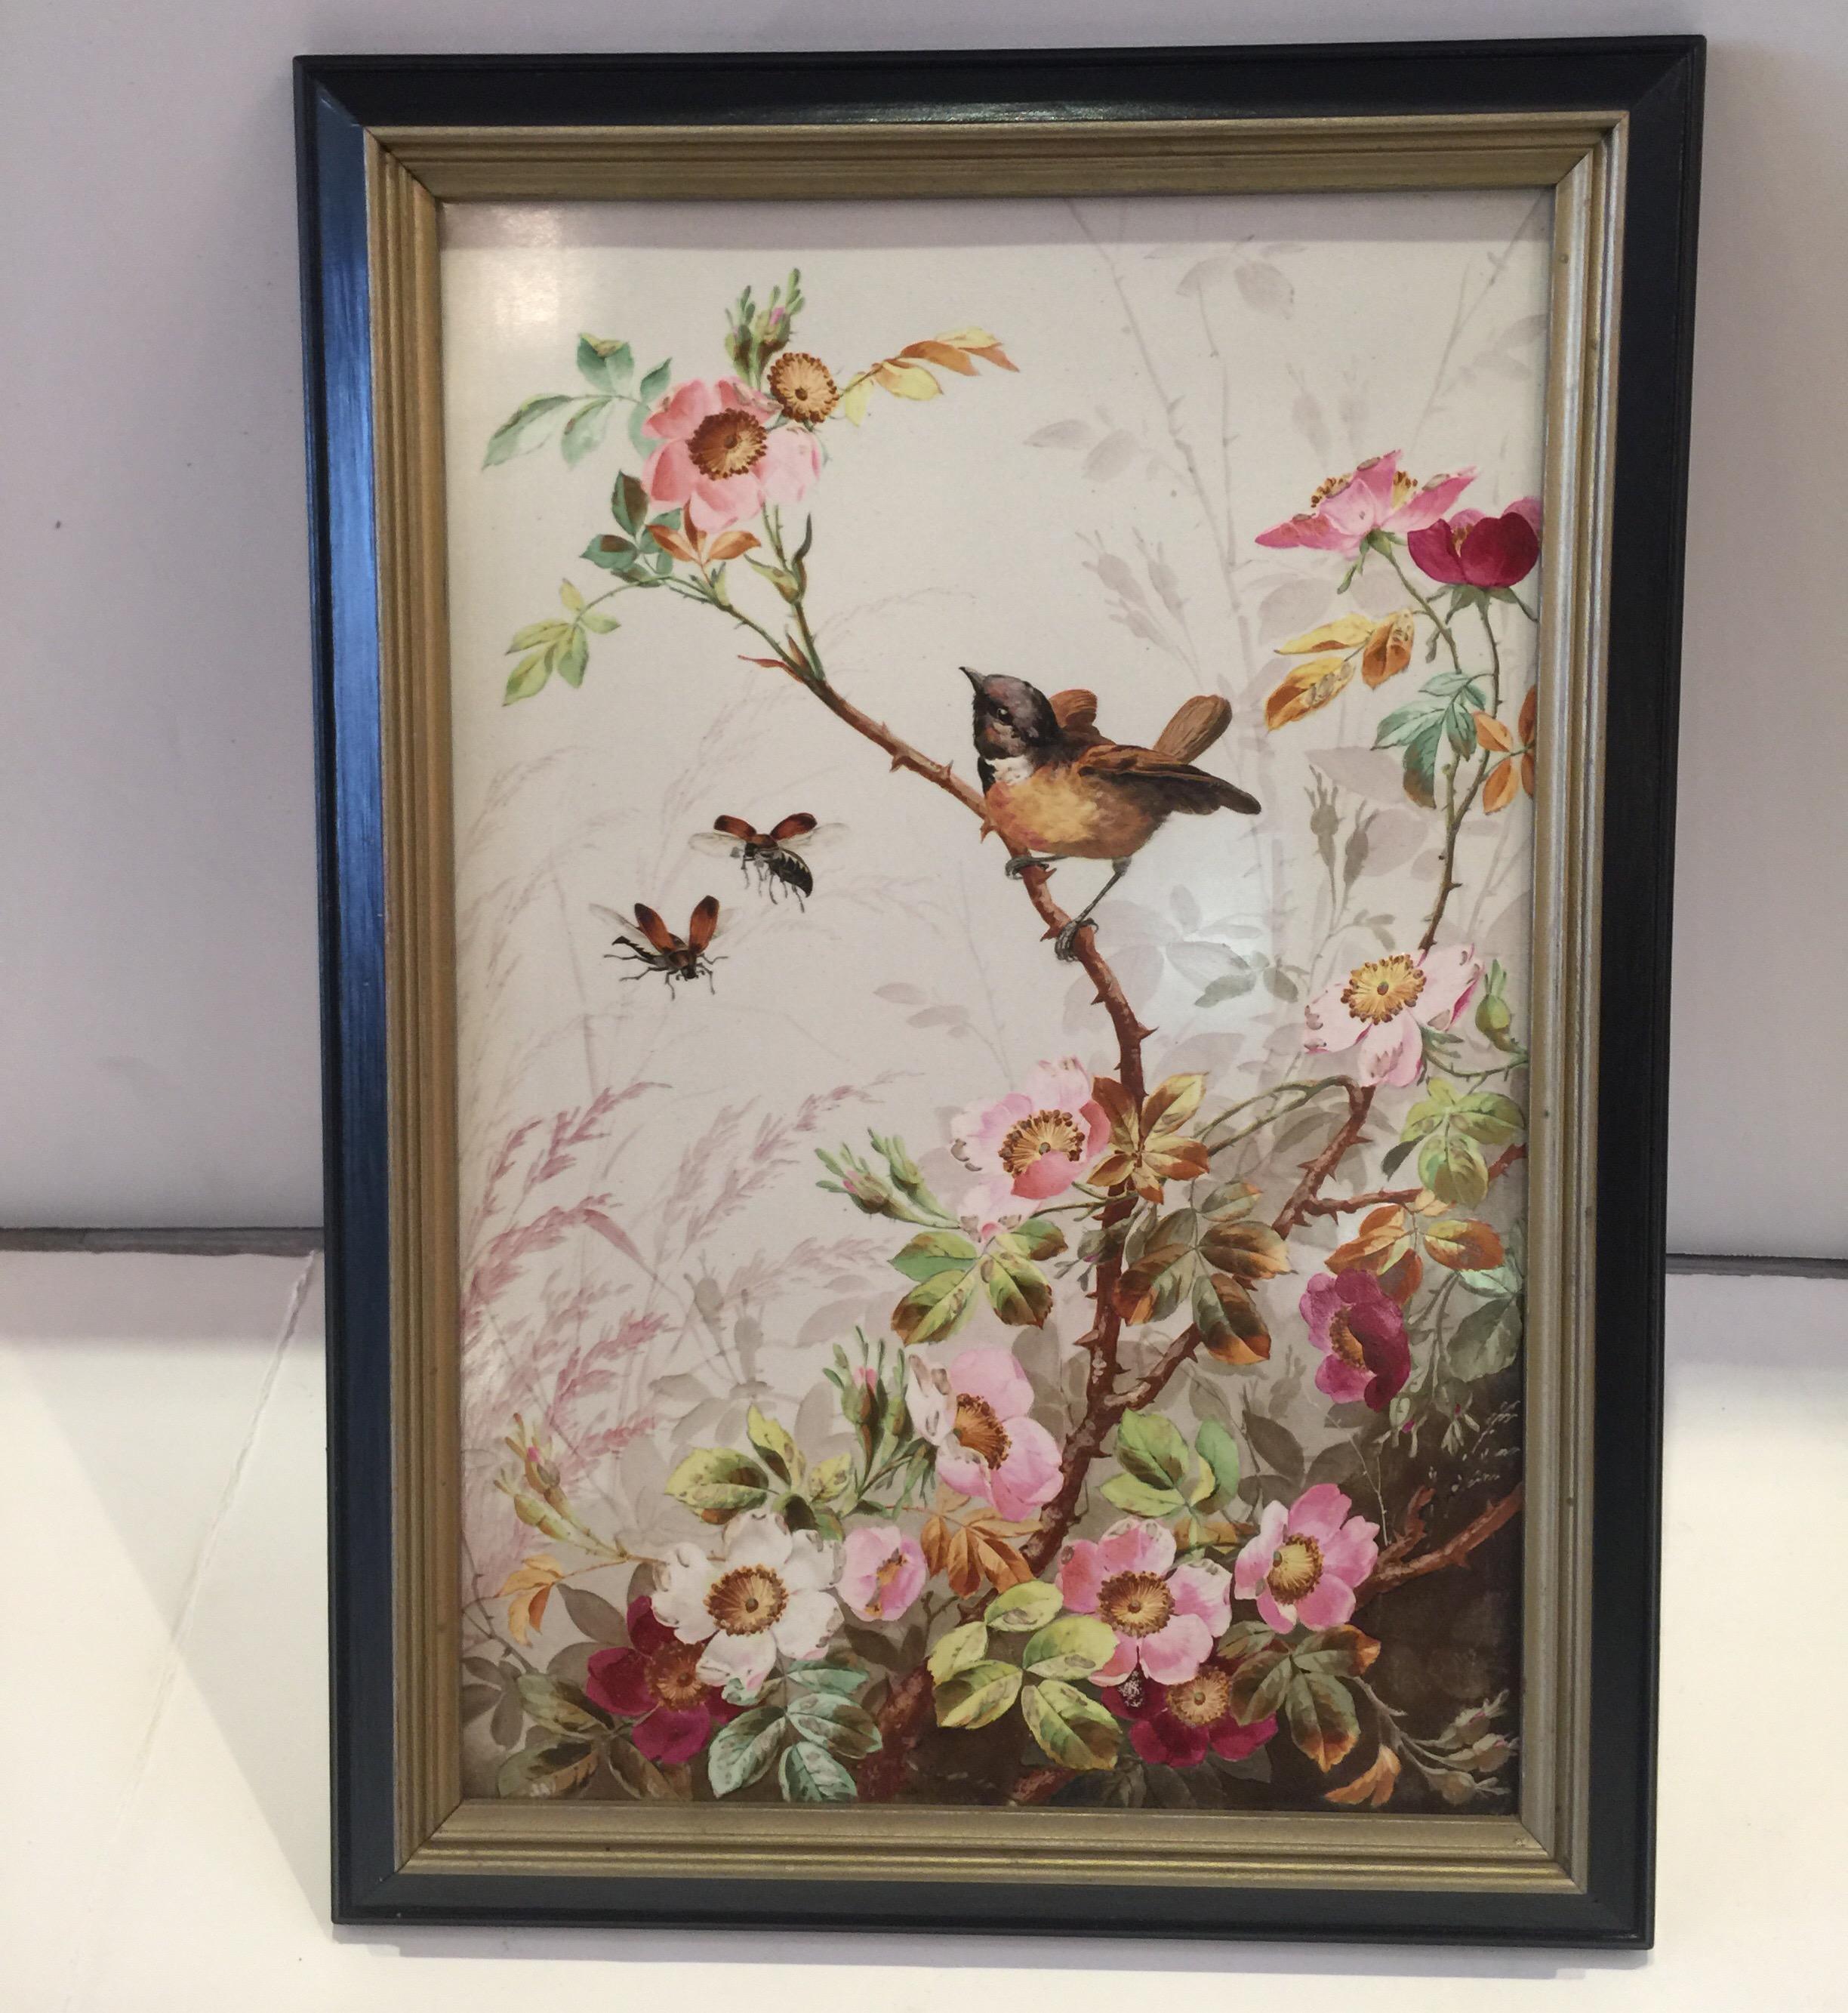 Charming Victorian hand painted Porcelain tile of a bird and two bees with flowers,
circa 1880-1890 European origin, very good painting
Dimensions: 14.5